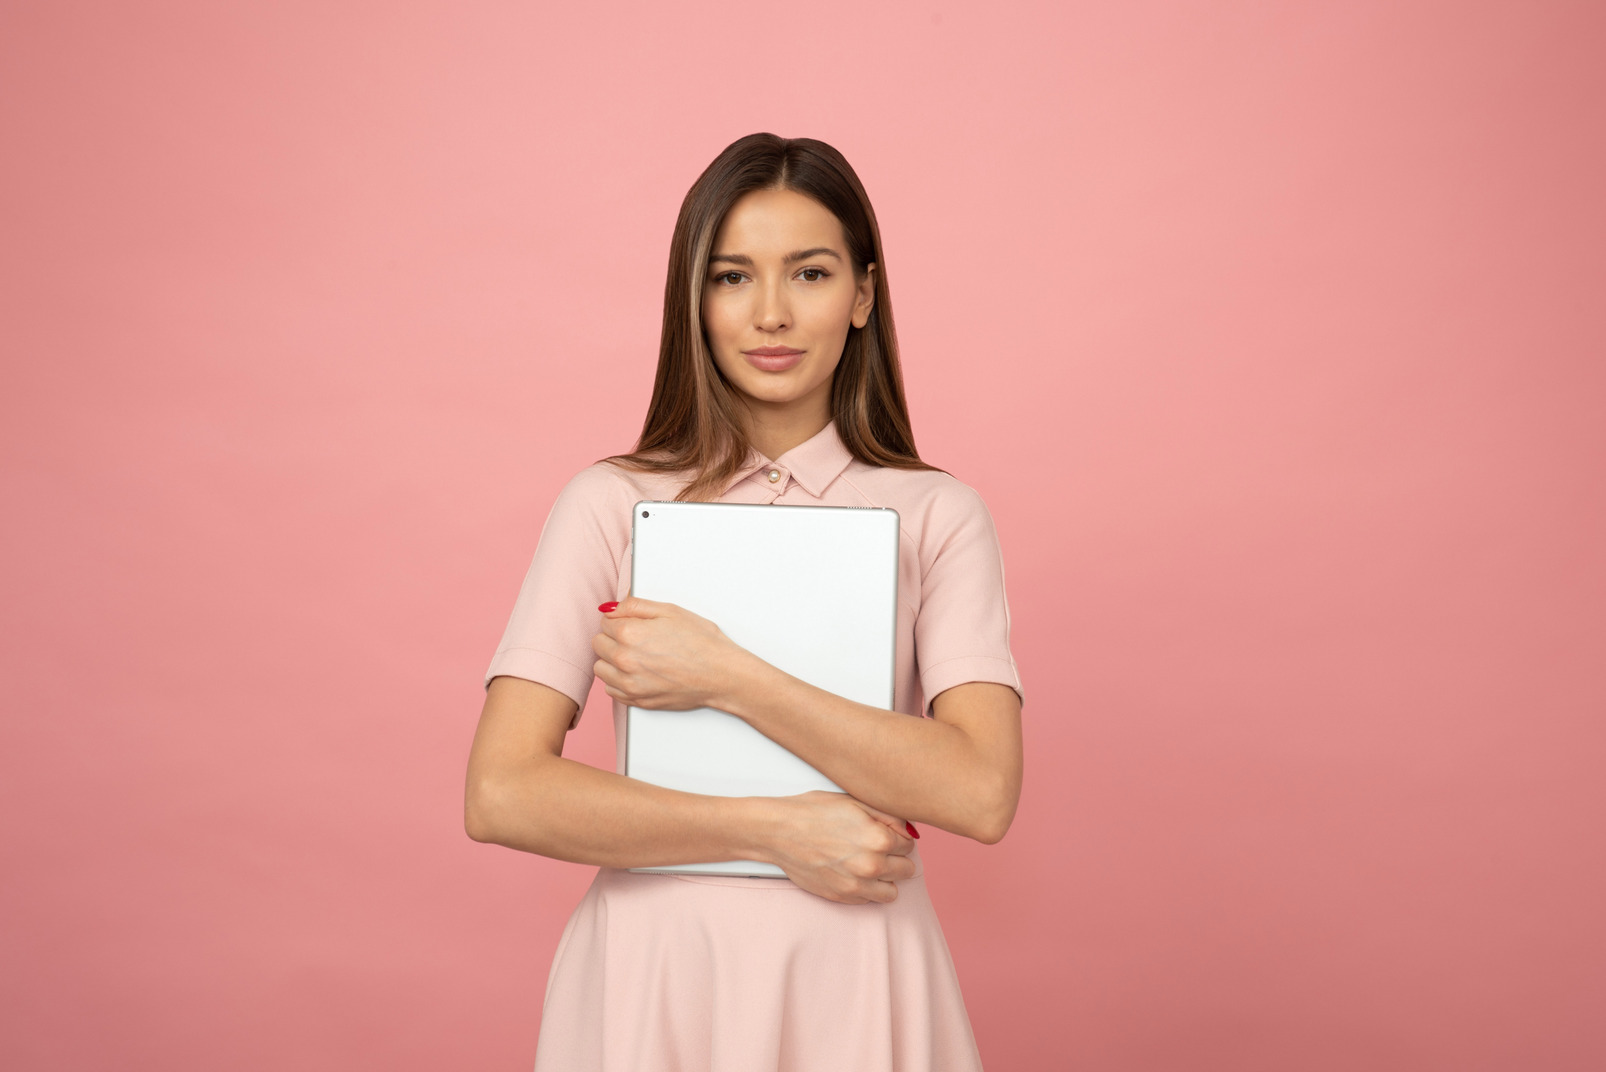 Young beautiful woman holding a laptop